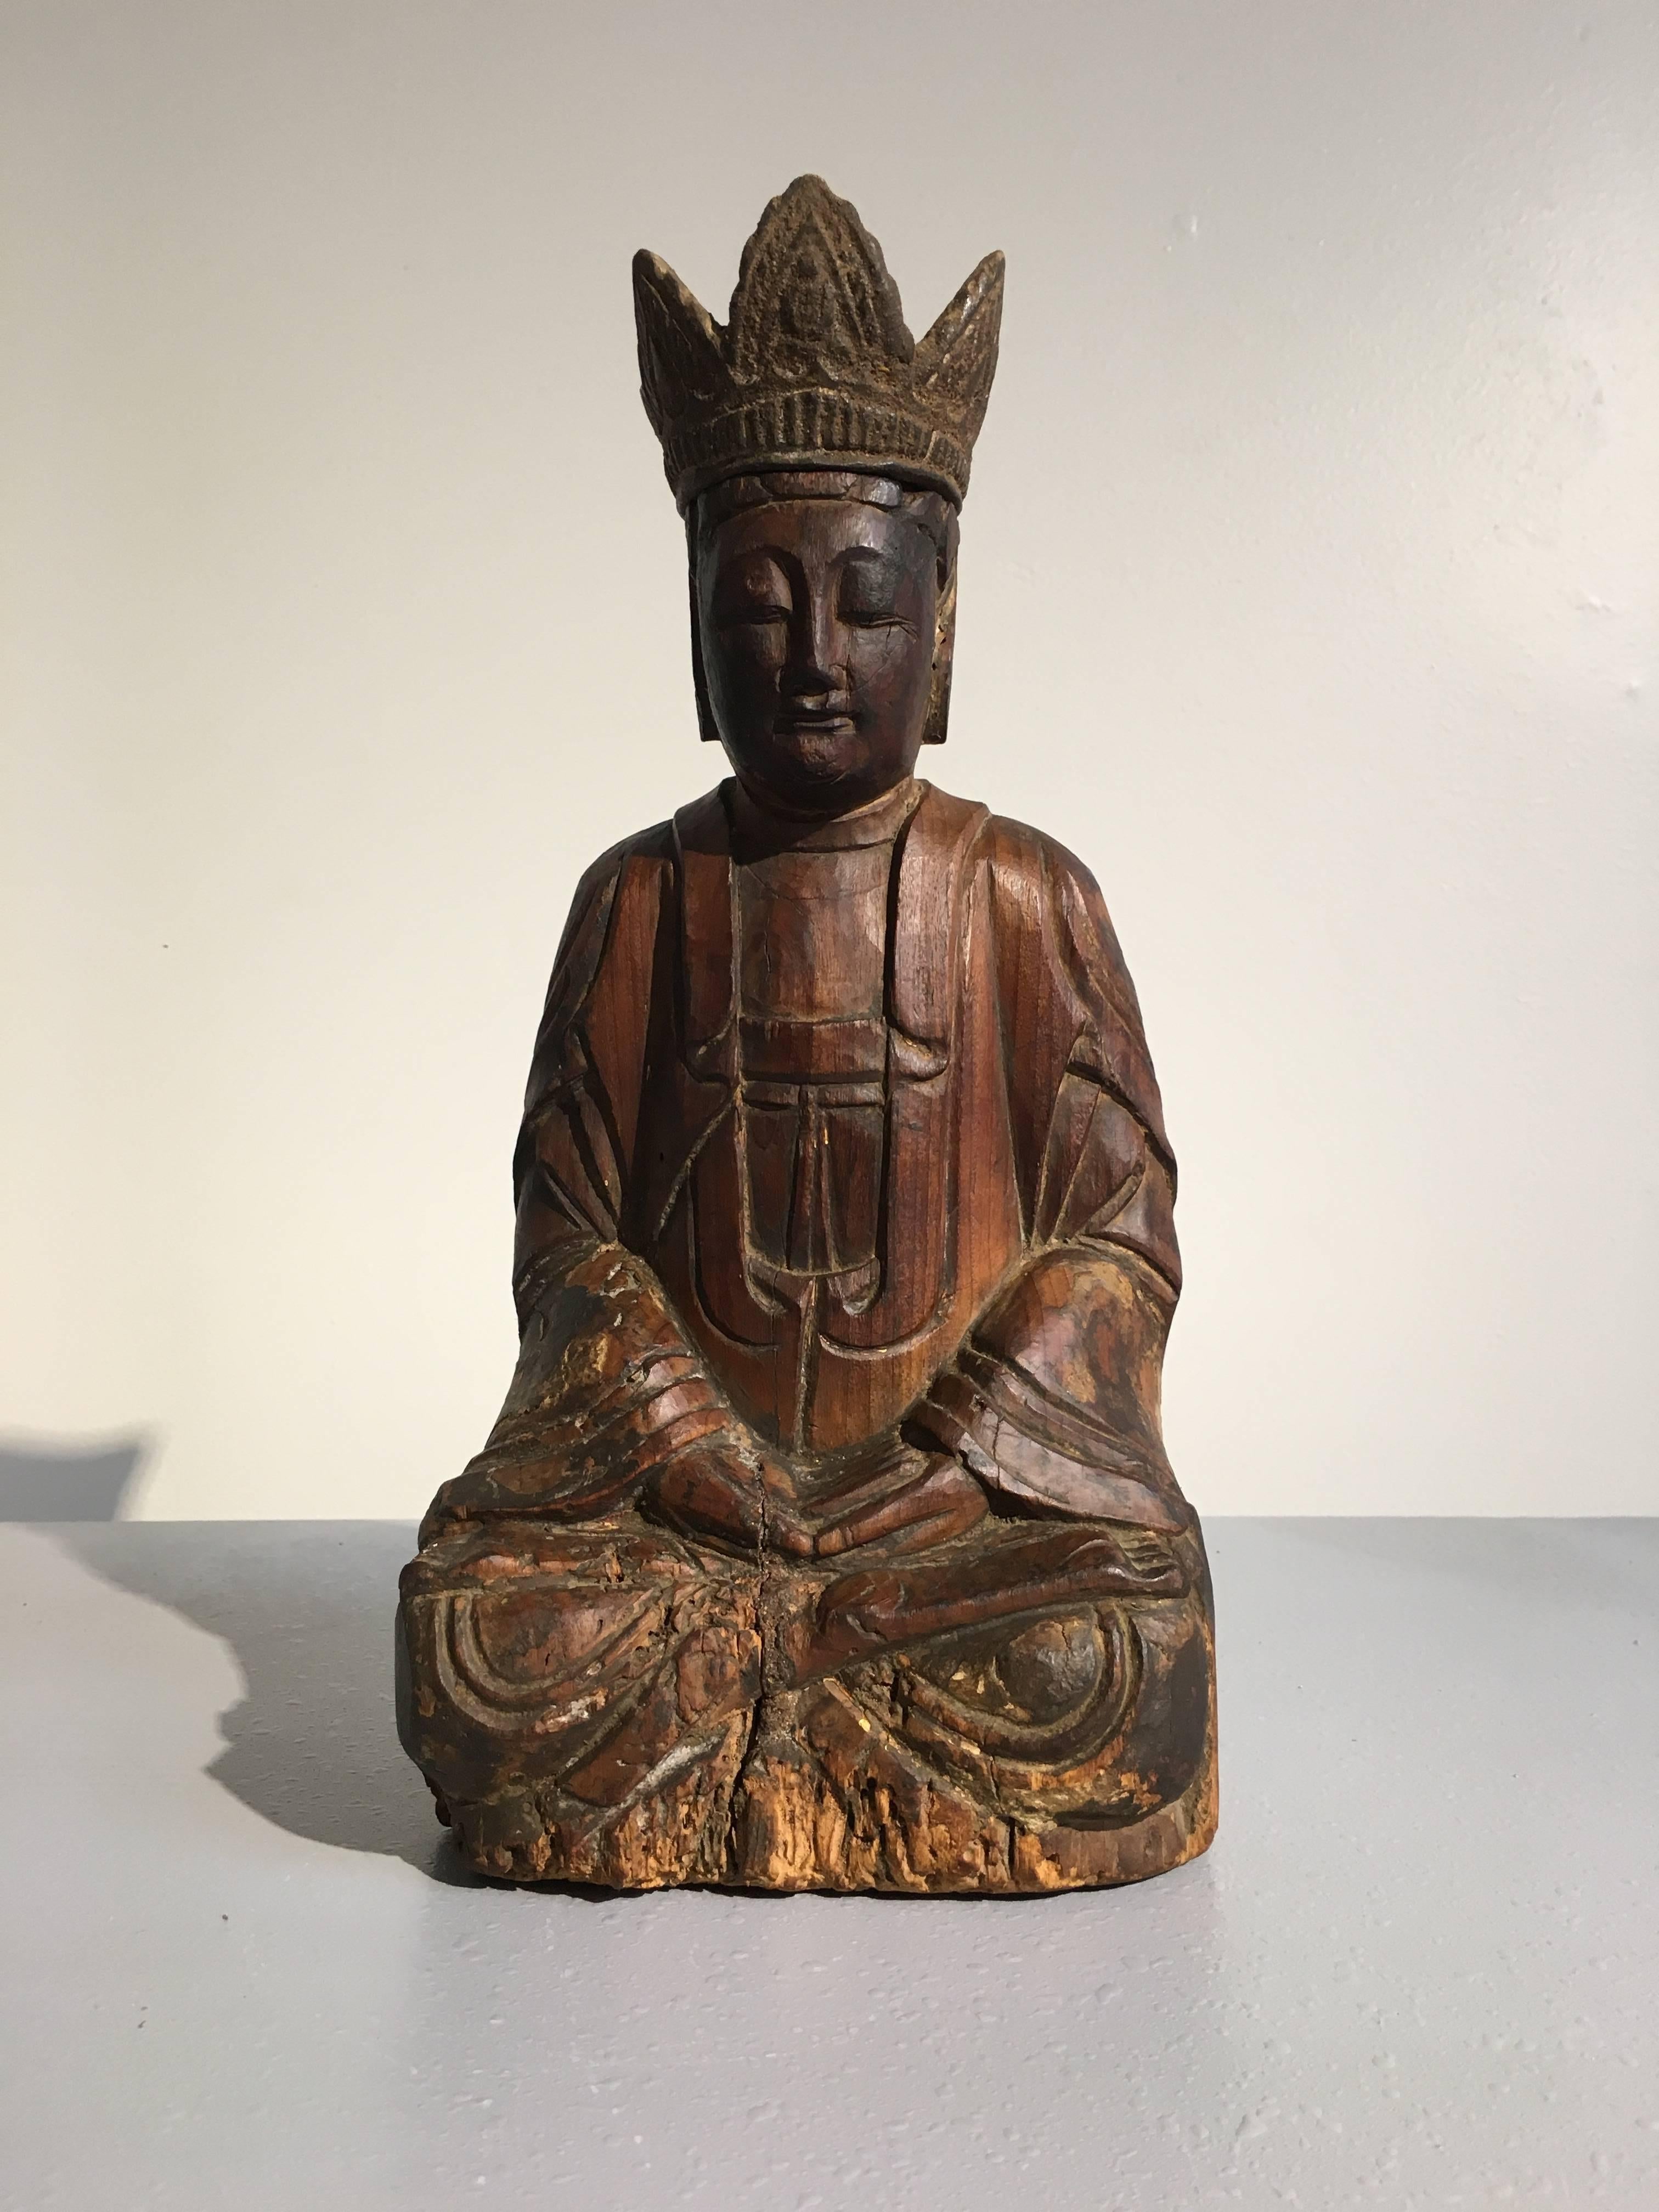 An attractive carved wood figure of the Bodhisattva Avalokiteshvara, known as Guanyin in China, late Ming Dynasty, early 17th century, China.

Guanyin, the Bodhisattva of Compassion, also known as Avalokiteshvara, sits calmly in dhyanasana, legs